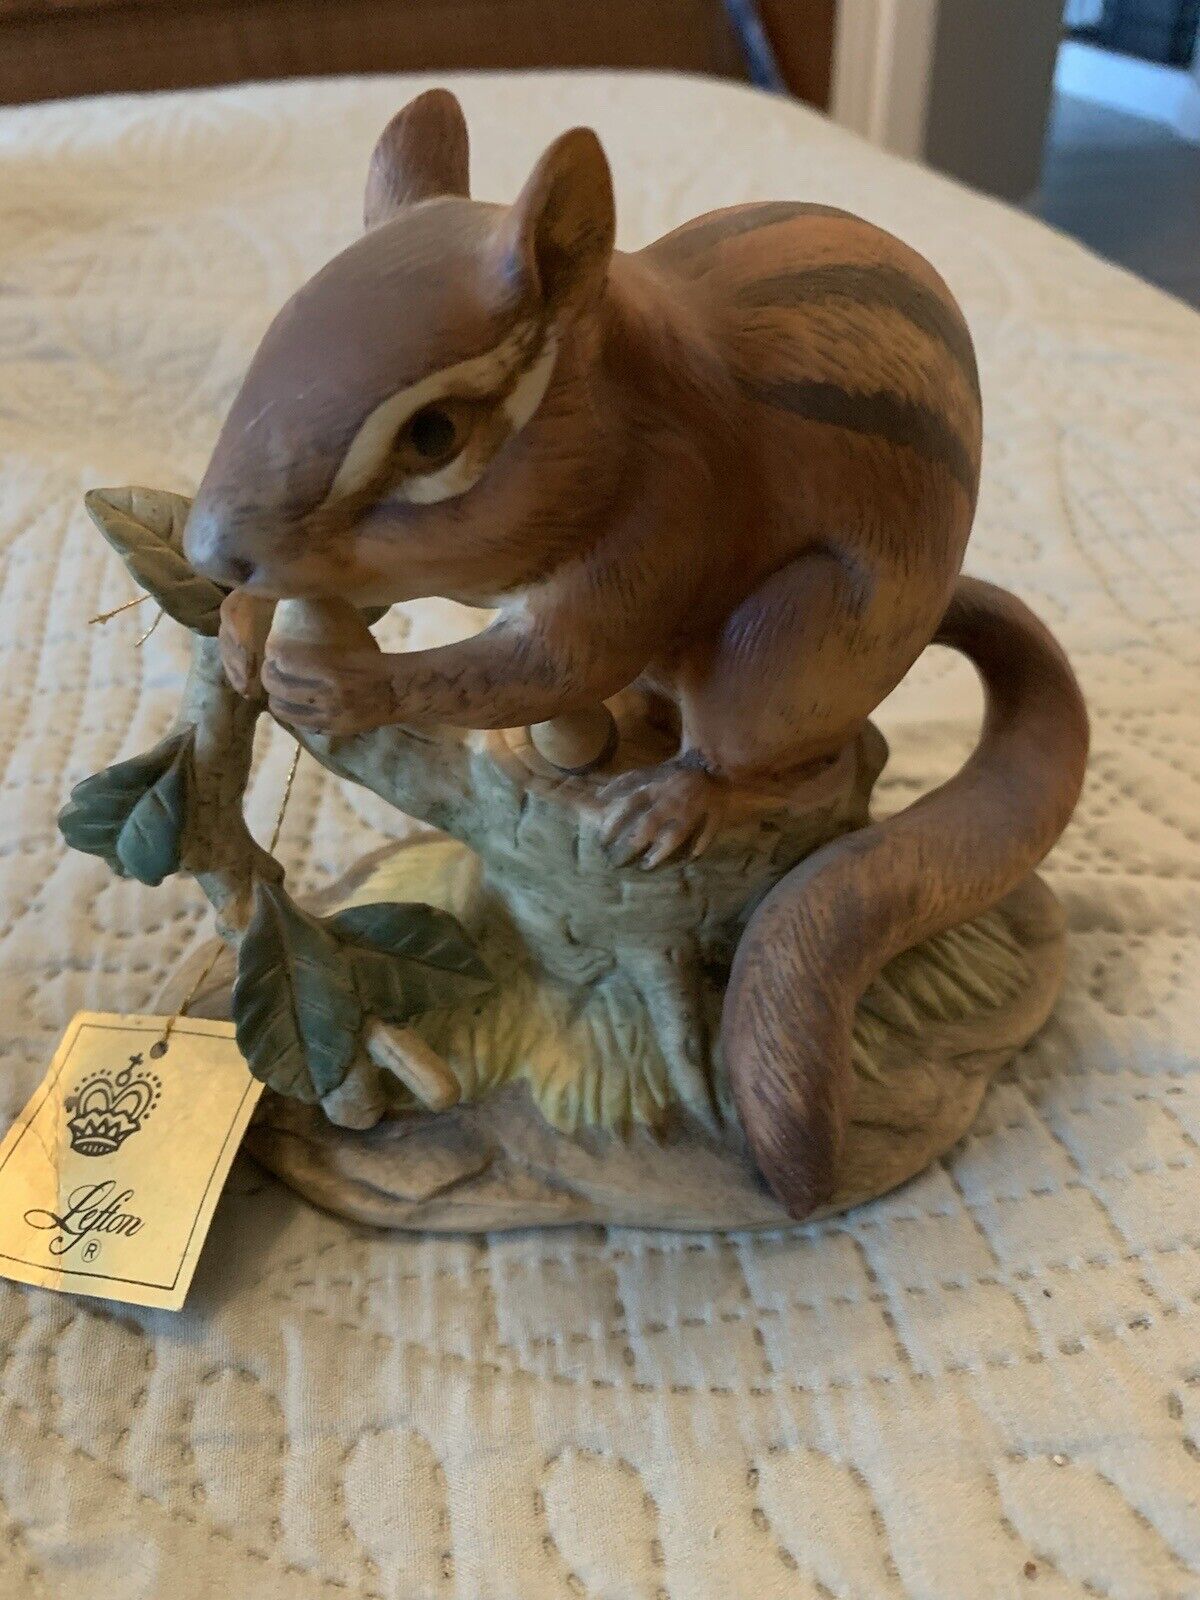 Vintage Lefton Chipmunk Ceramic Figurine Made In Japan Signed And Tagged - Cute